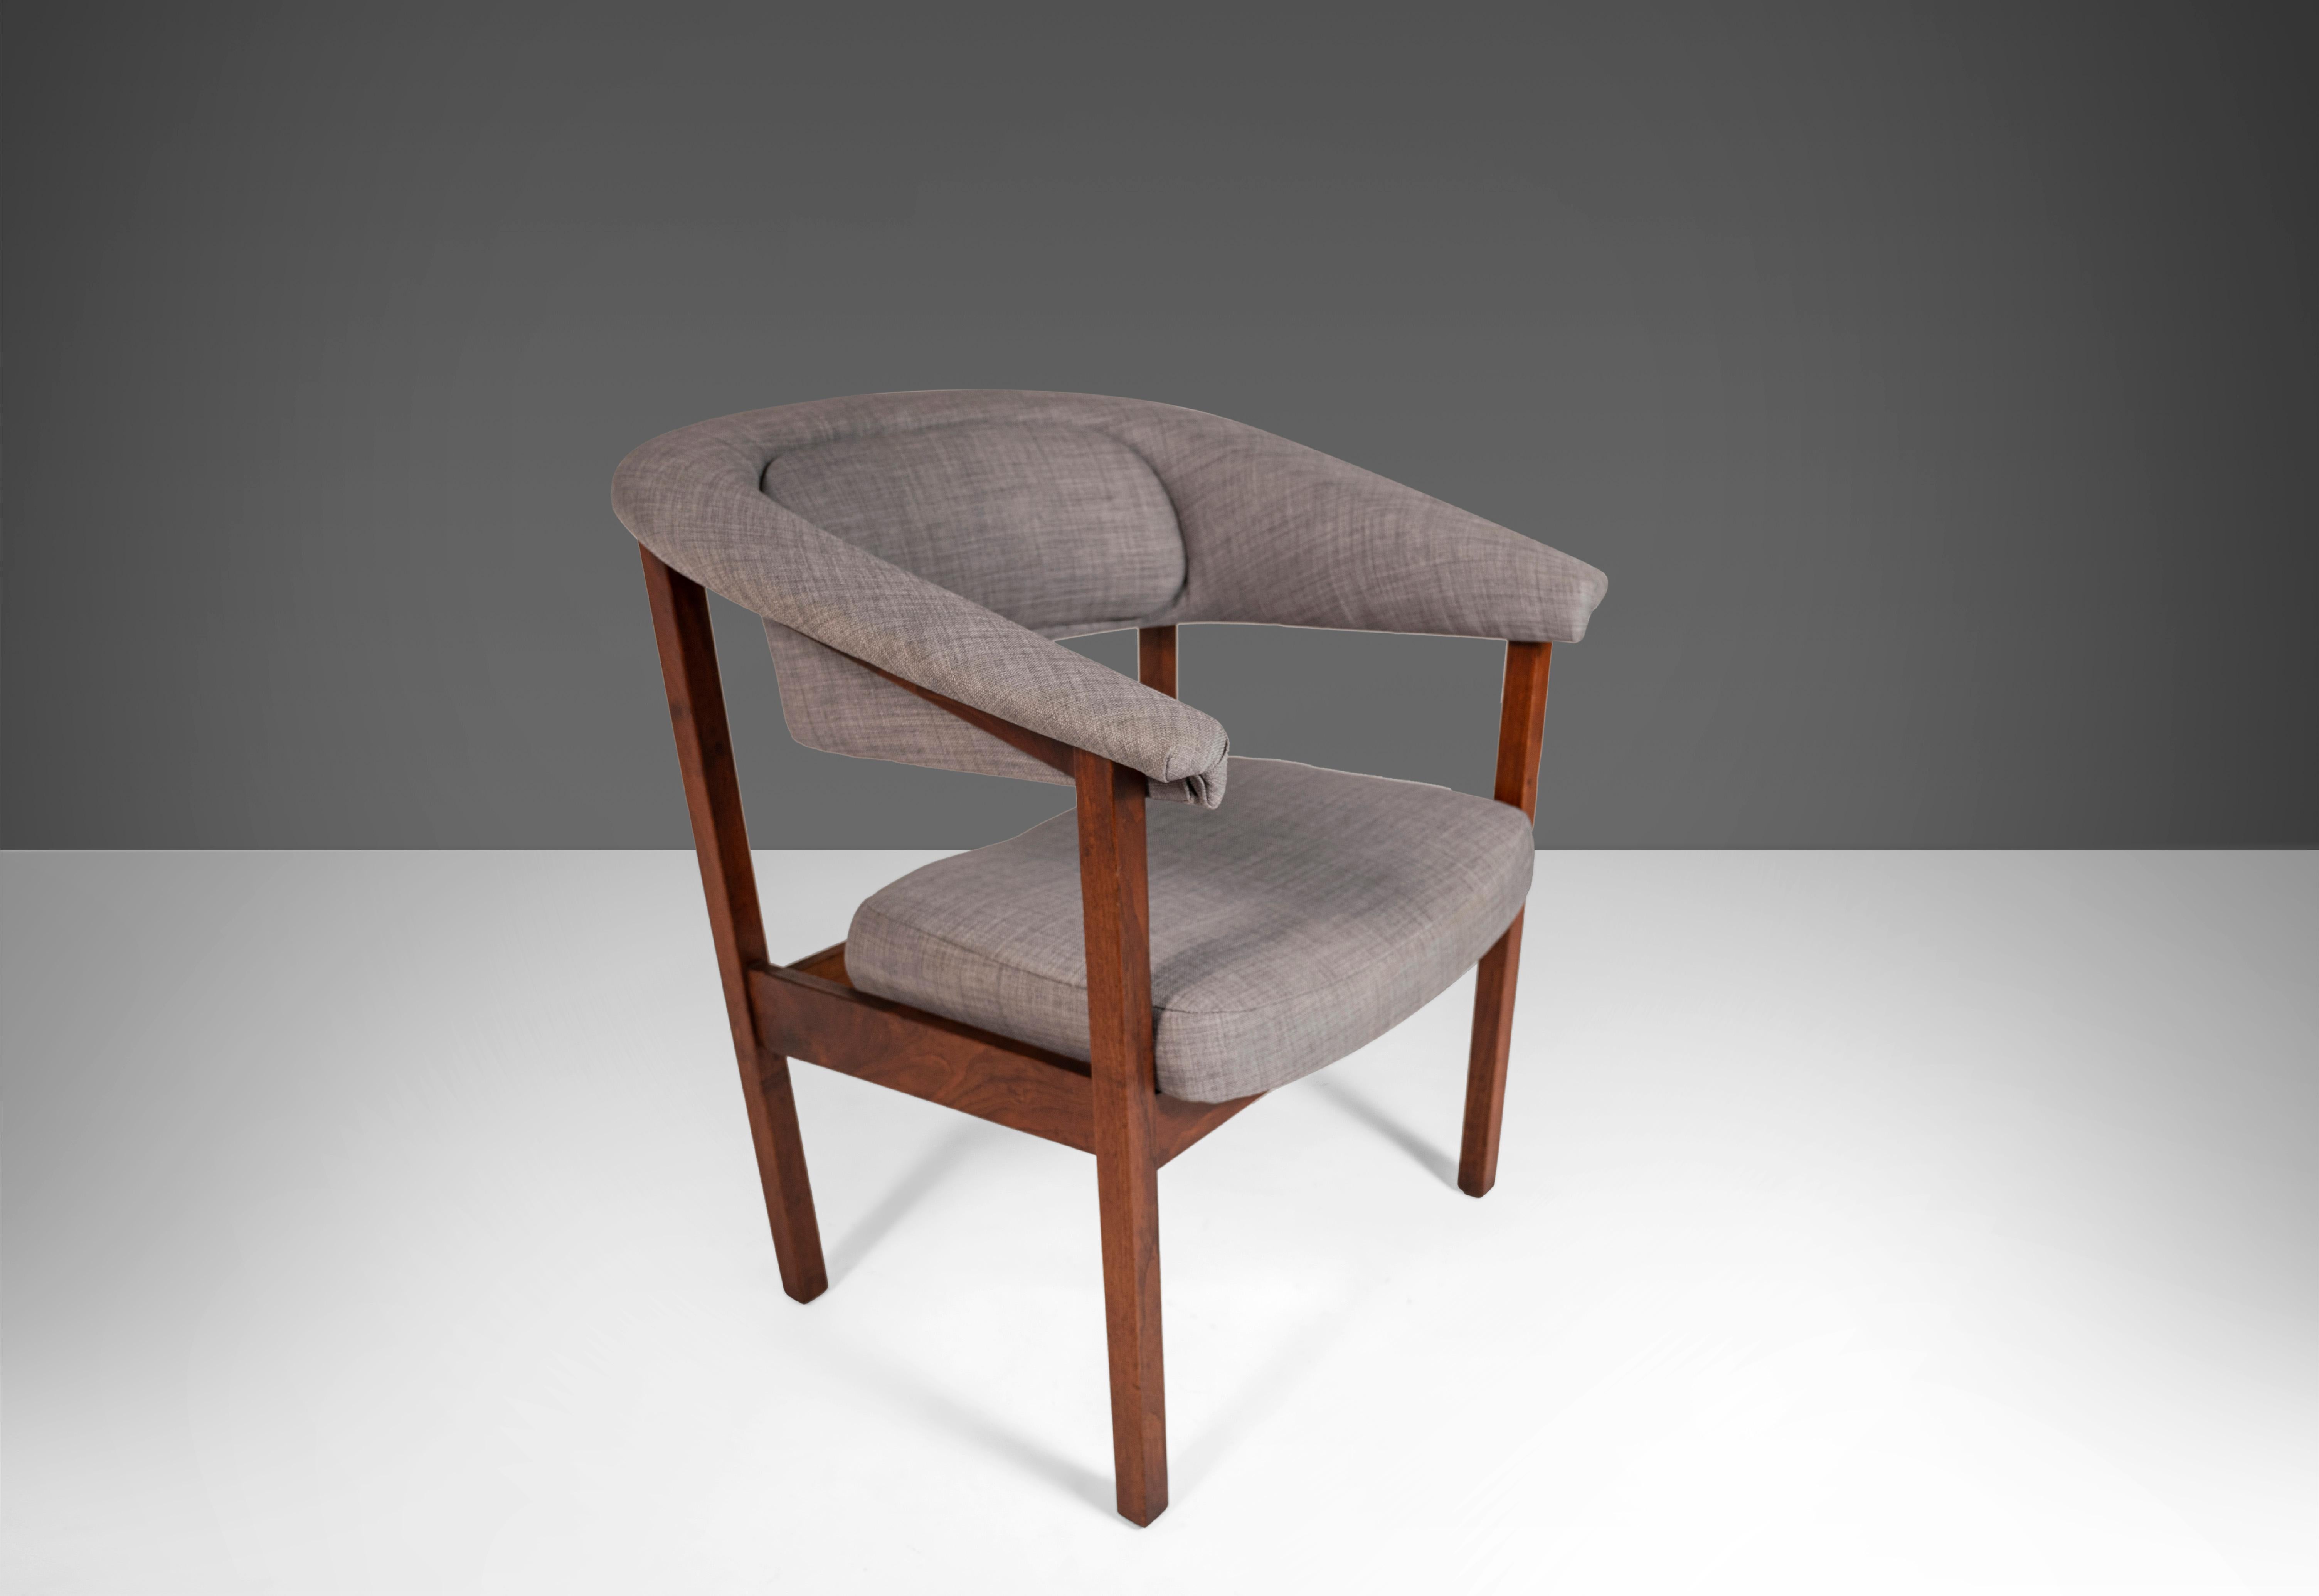 Pair of Chairs by Arthur Umanoff for Madison in Original Knit Fabric, c. 1960s For Sale 6